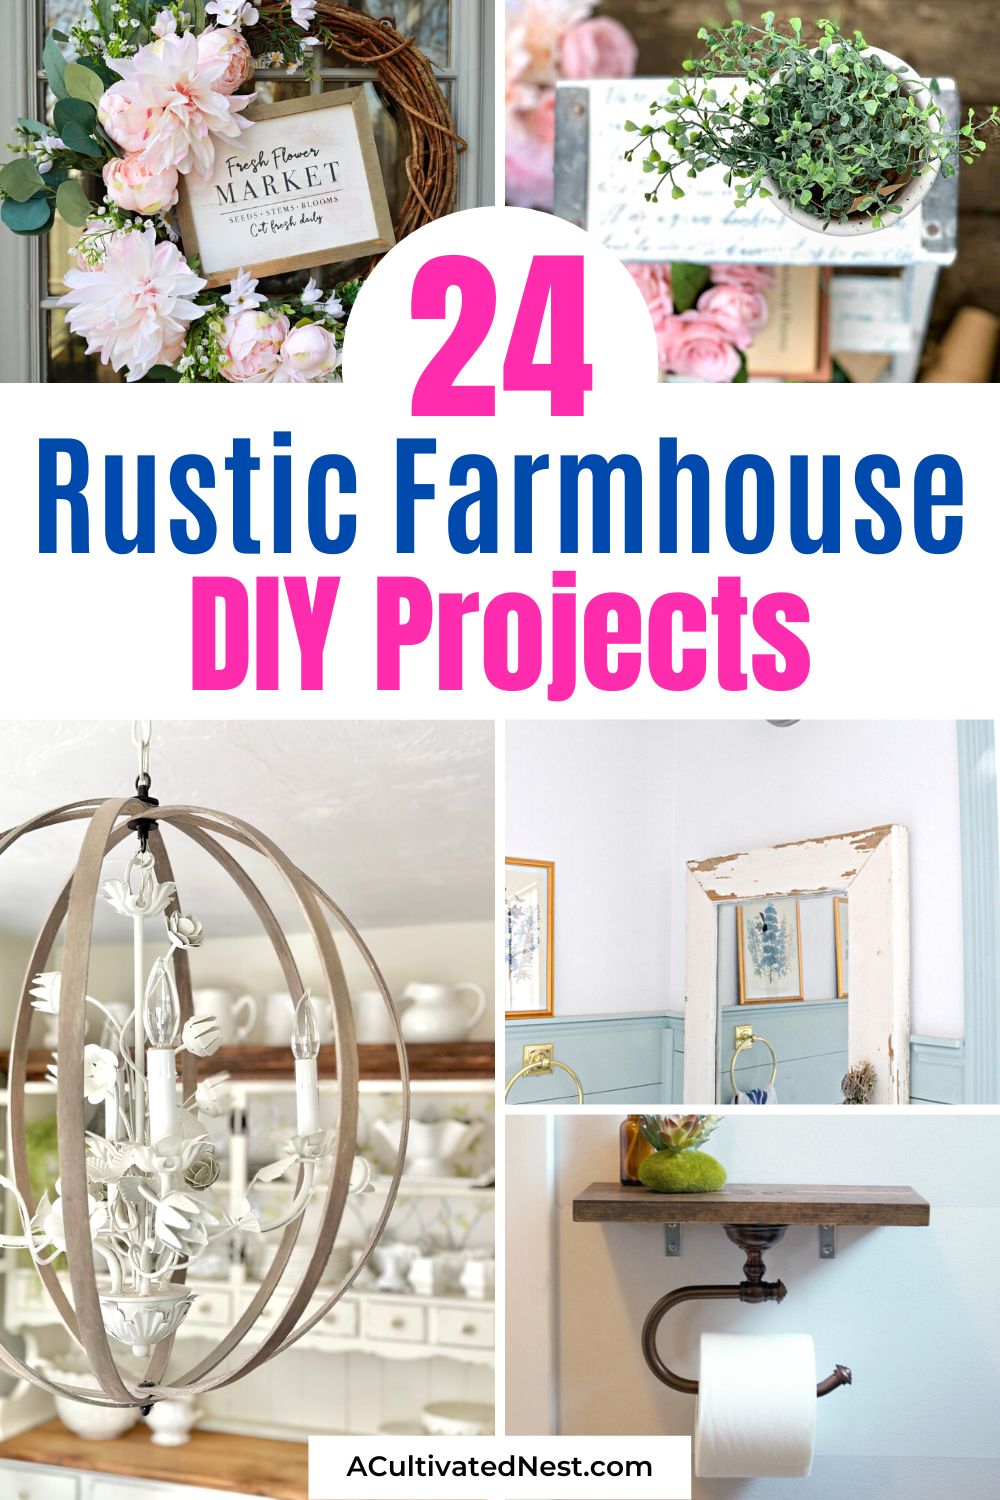 24 Charming Rustic Farmhouse DIY Projects- Get ready to transform your space with these charming rustic farmhouse DIY projects that celebrate the vintage coziness of farmhouse style. Discover creative ideas for rustic décor and furniture makeovers that will bring warmth and character to your home! | #diyProjects #FarmhouseDecor #CozyHome #DIYDecor #ACultivatedNest